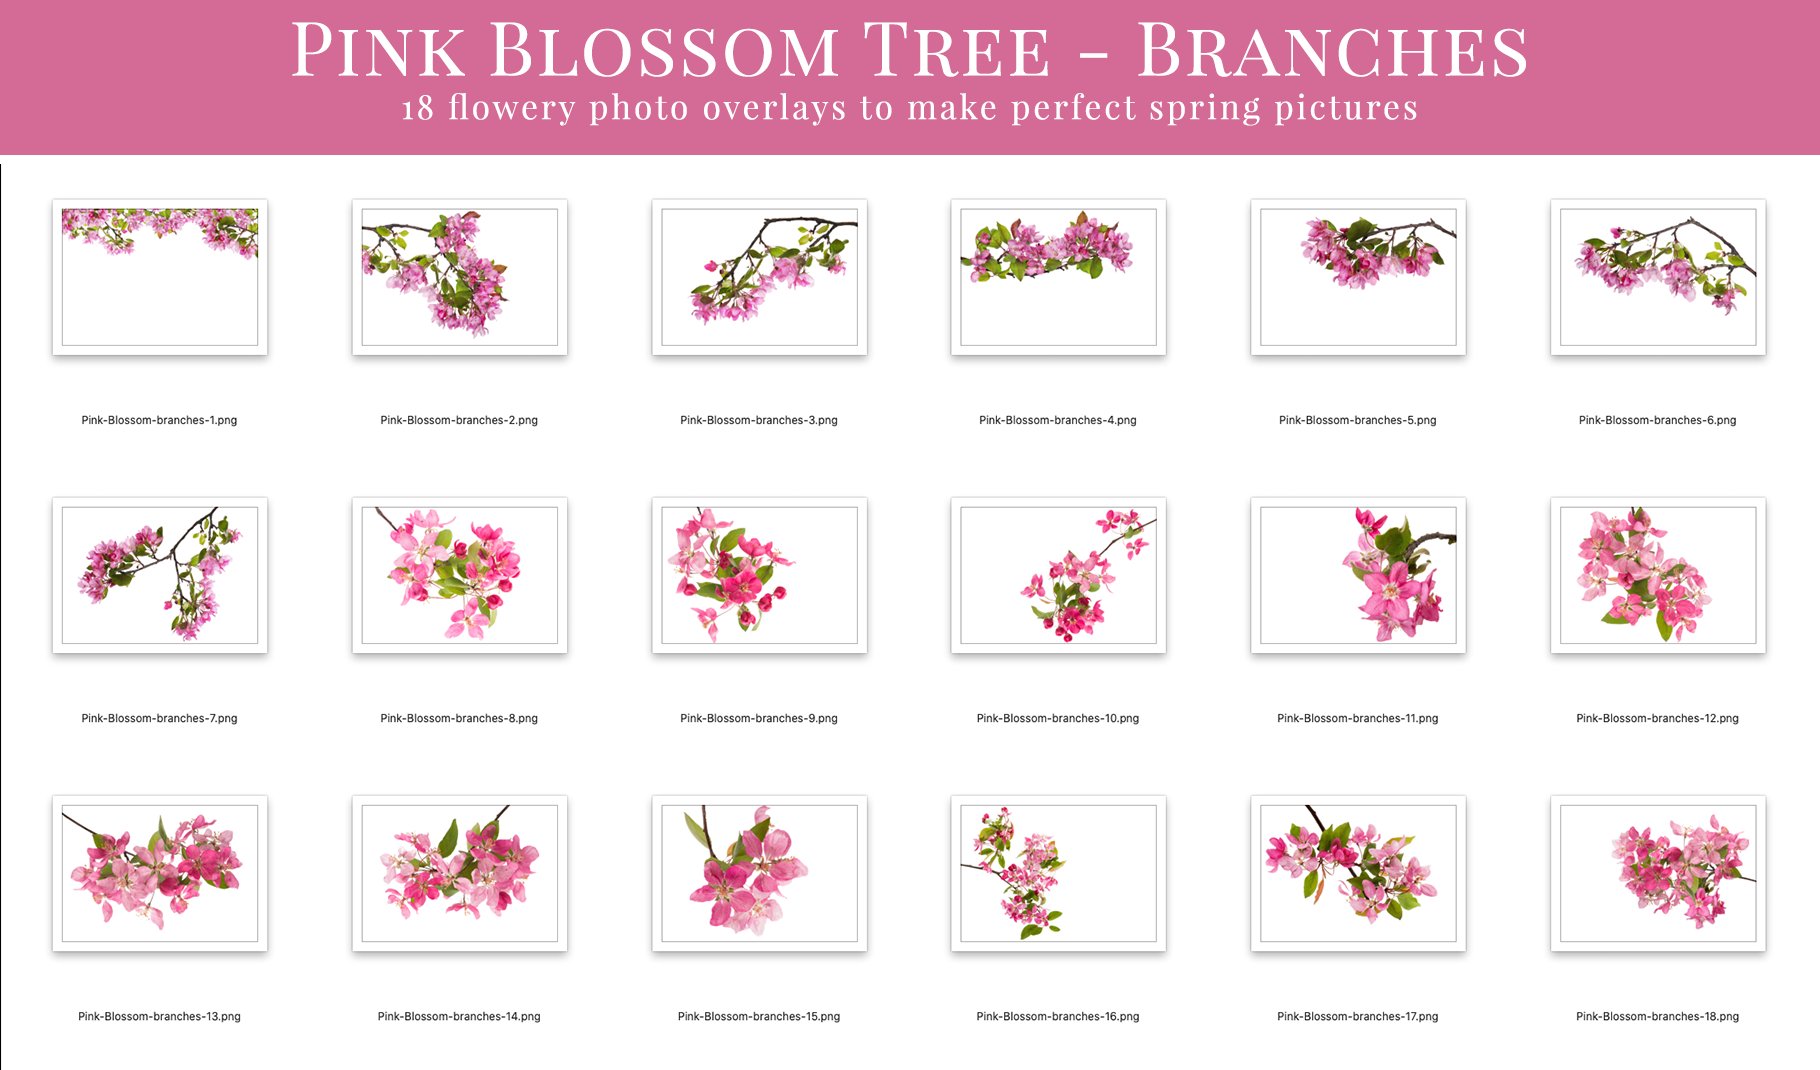 pink blossom tree photo overlays branches 896